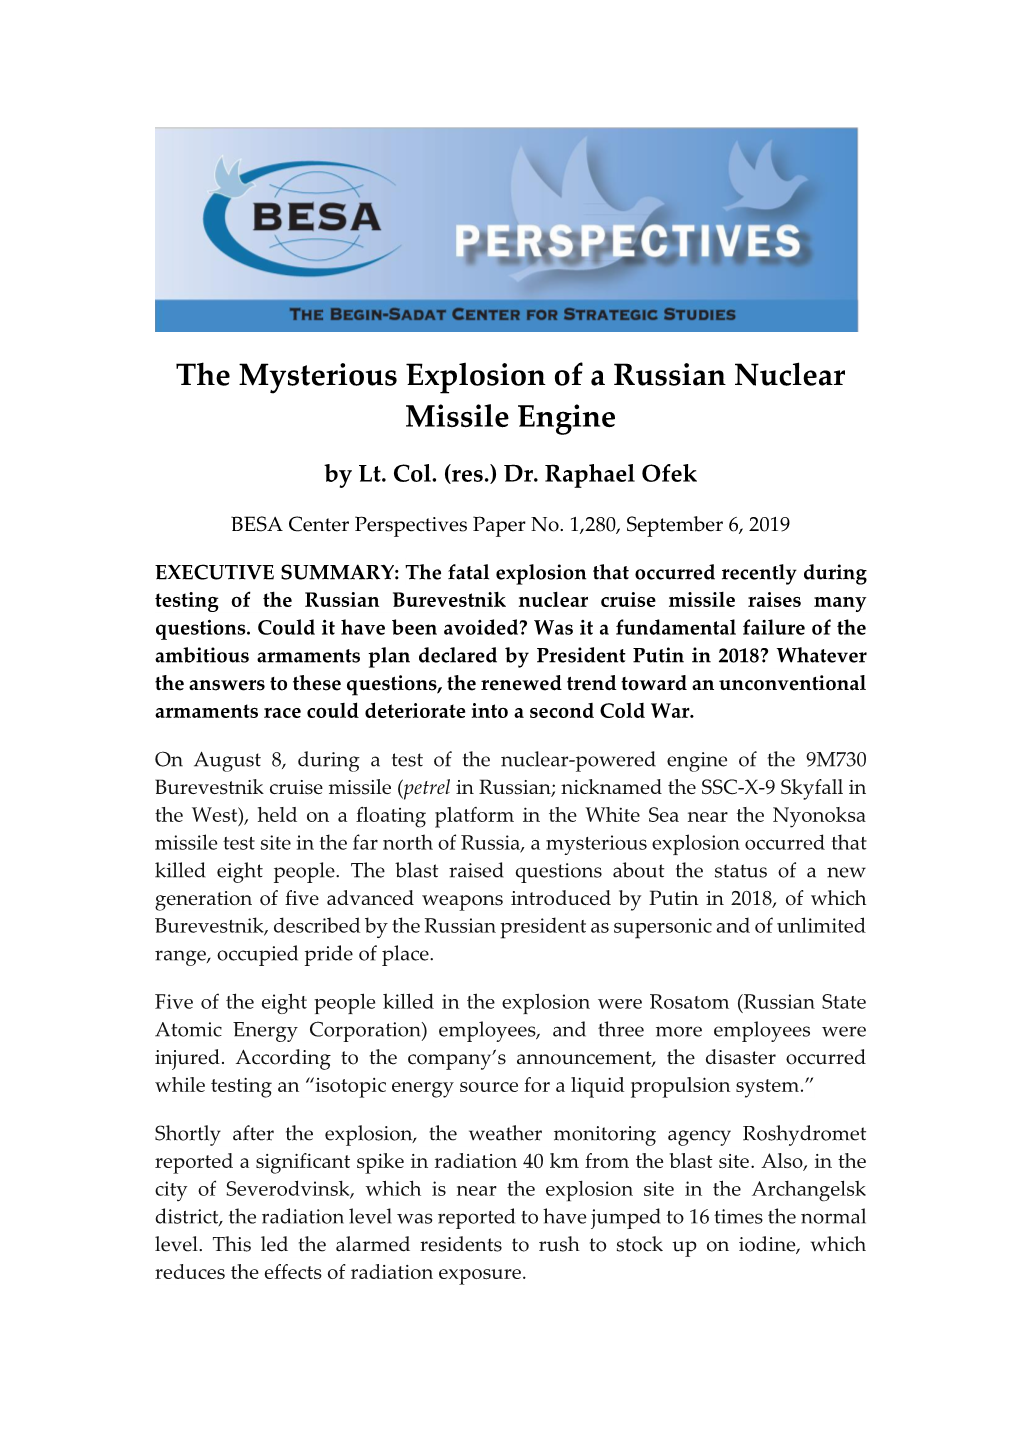 The Mysterious Explosion of a Russian Nuclear Missile Engine